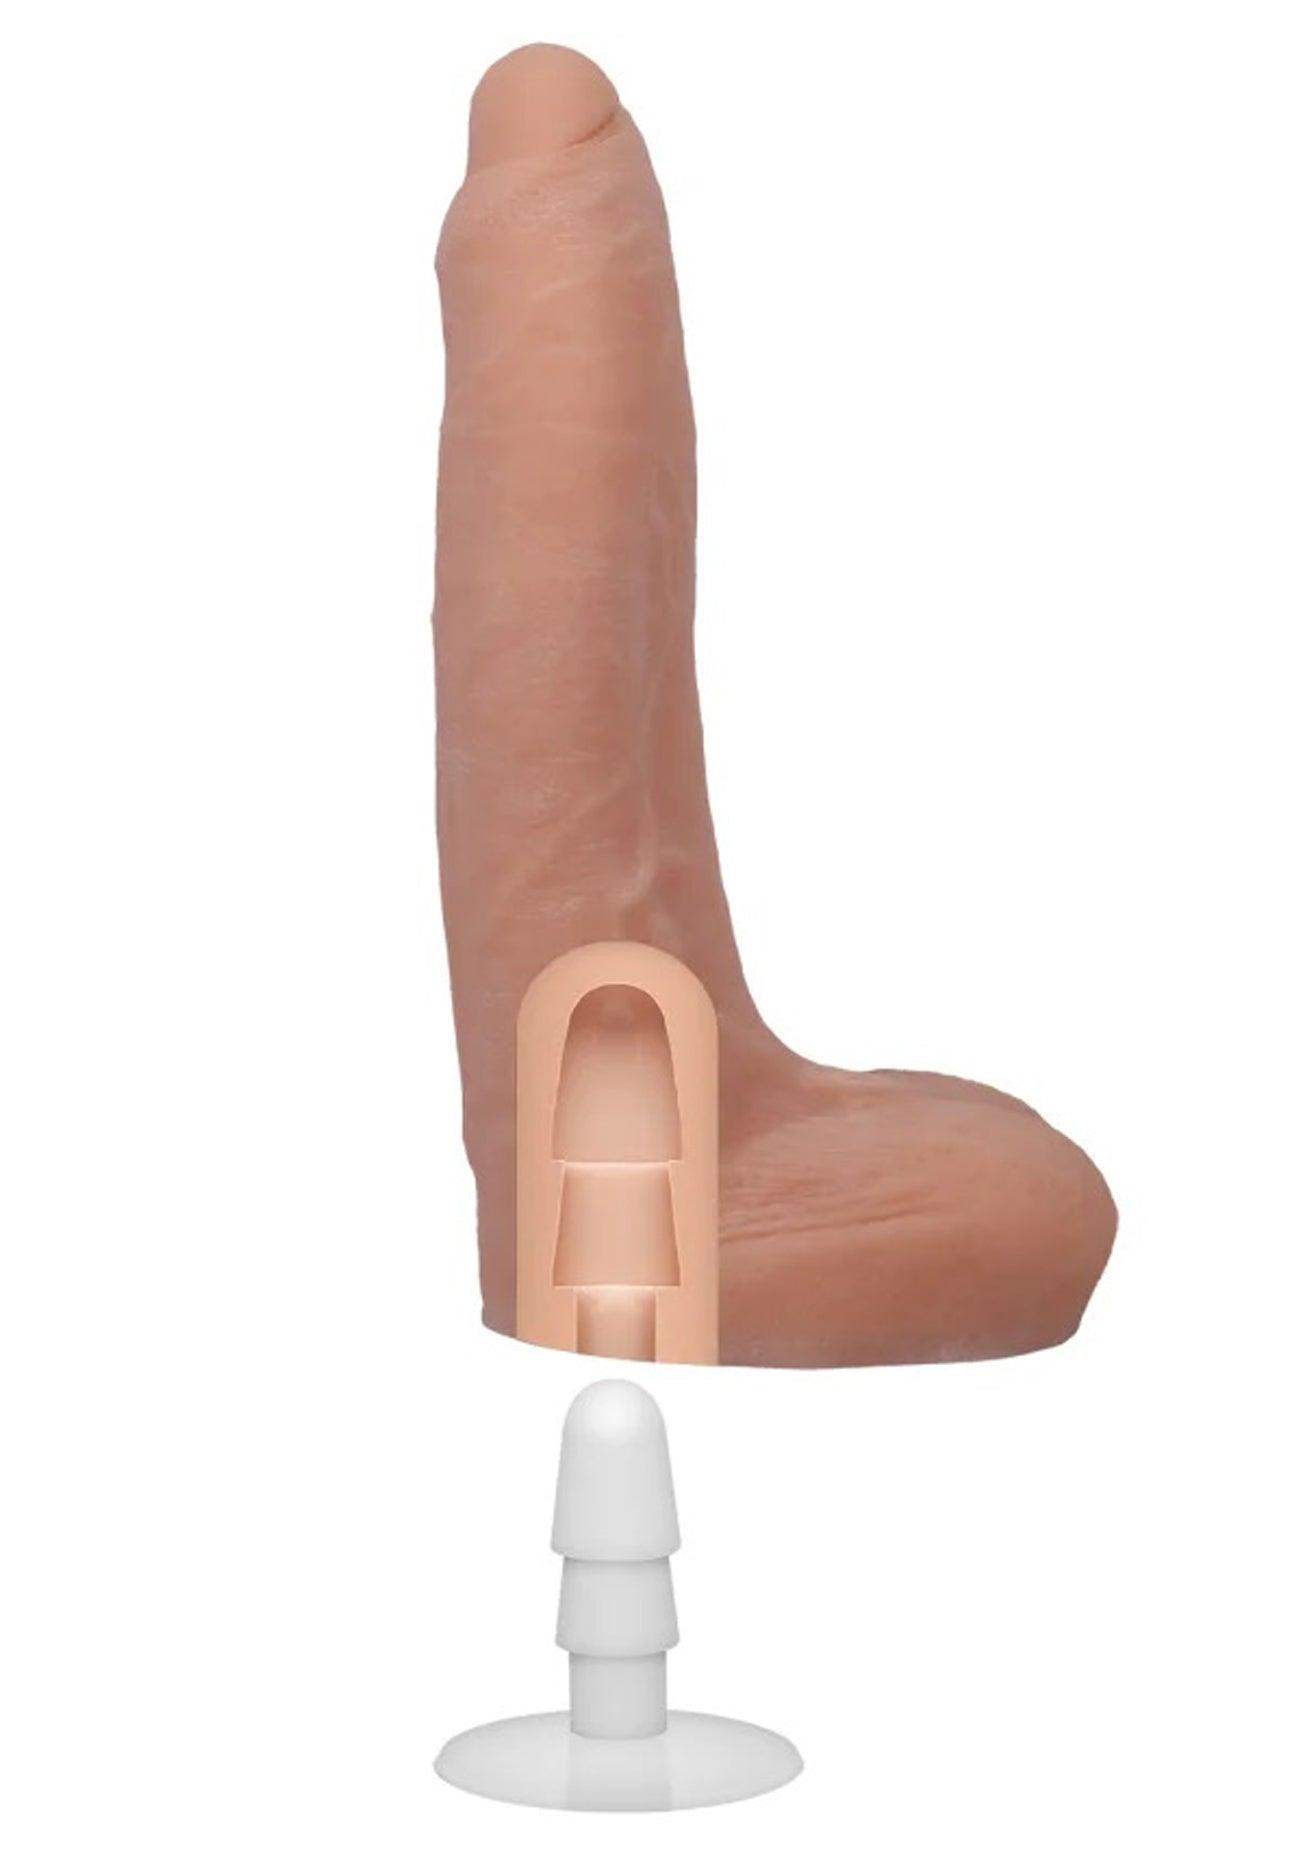 Signature Cocks - Owen Gray - 9 Inch Ultraskyn Cock With Removable Vac-U-Lock Suction Cup - Skin Tone - My Sex Toy Hub